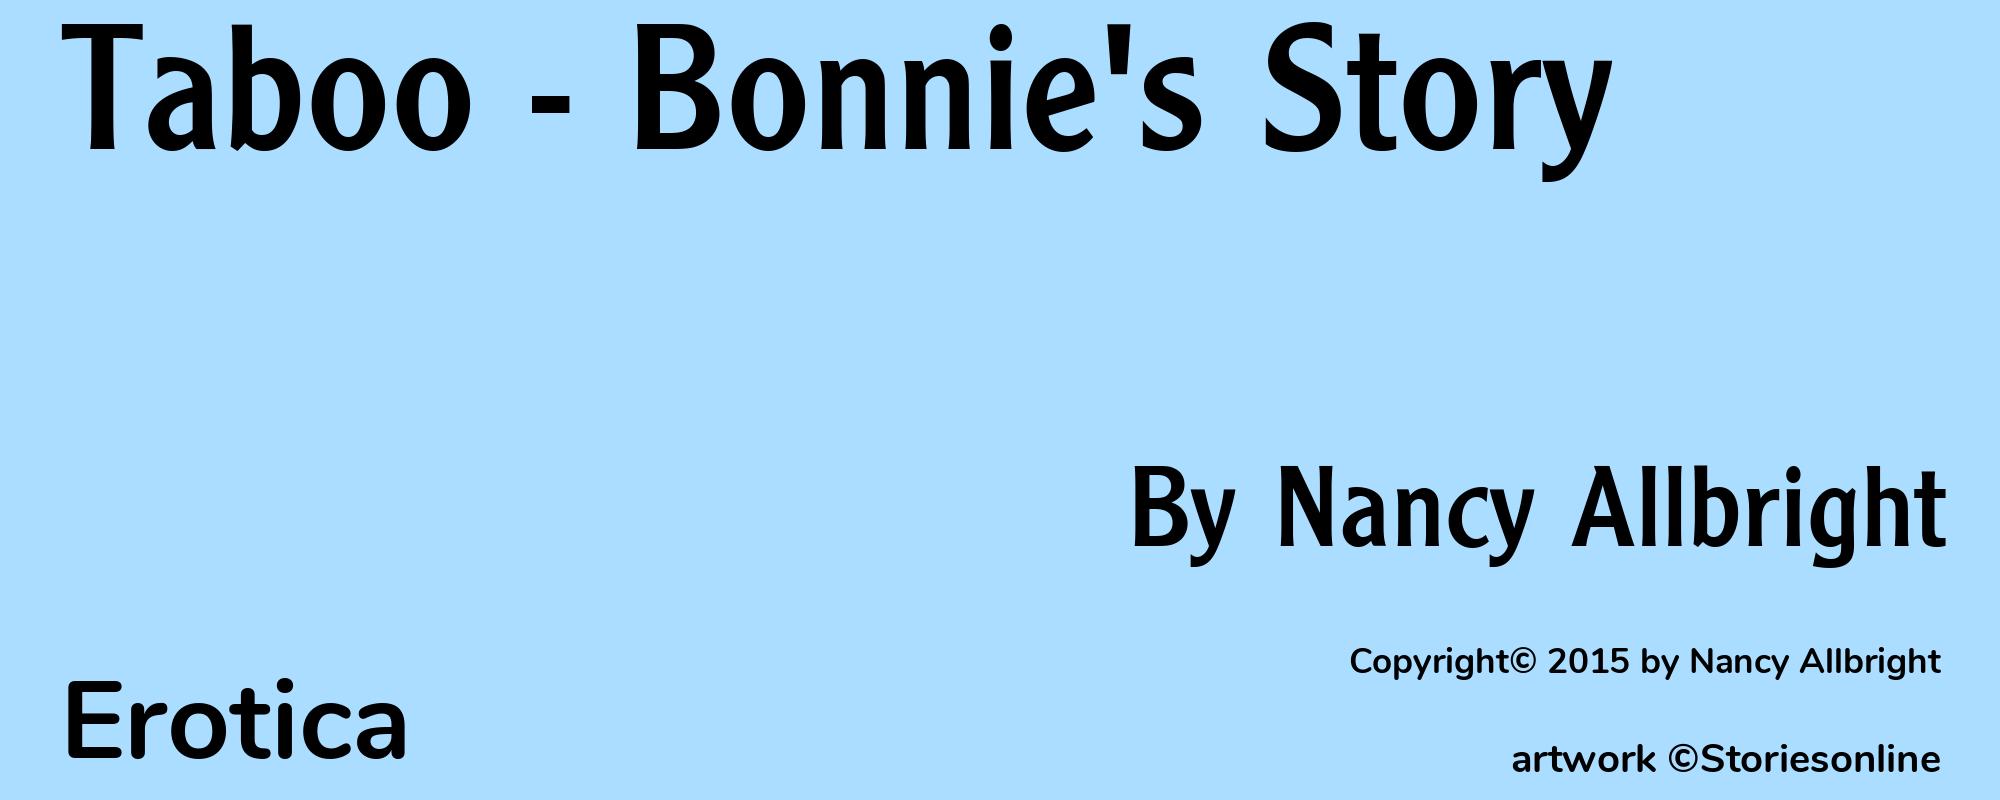 Taboo - Bonnie's Story - Cover